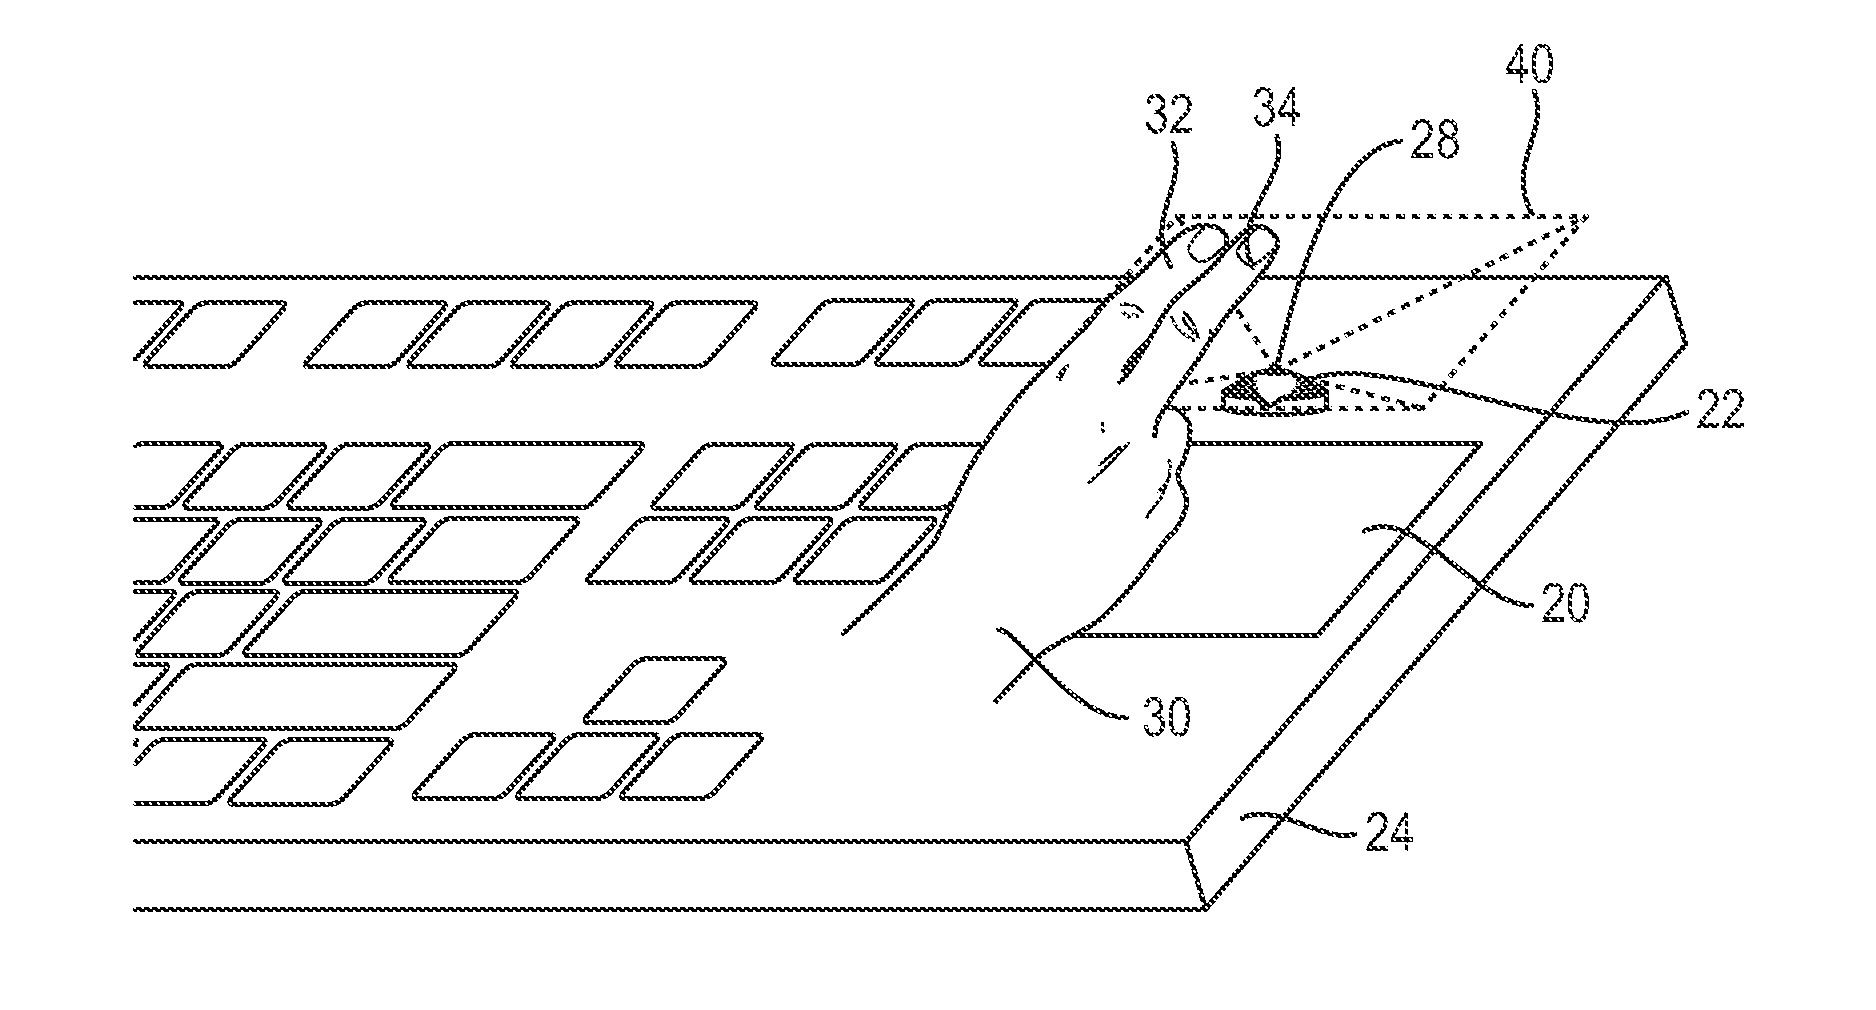 Multi-touch input apparatus and its interface method using data fusion of a single touch sensor pad and an imaging sensor